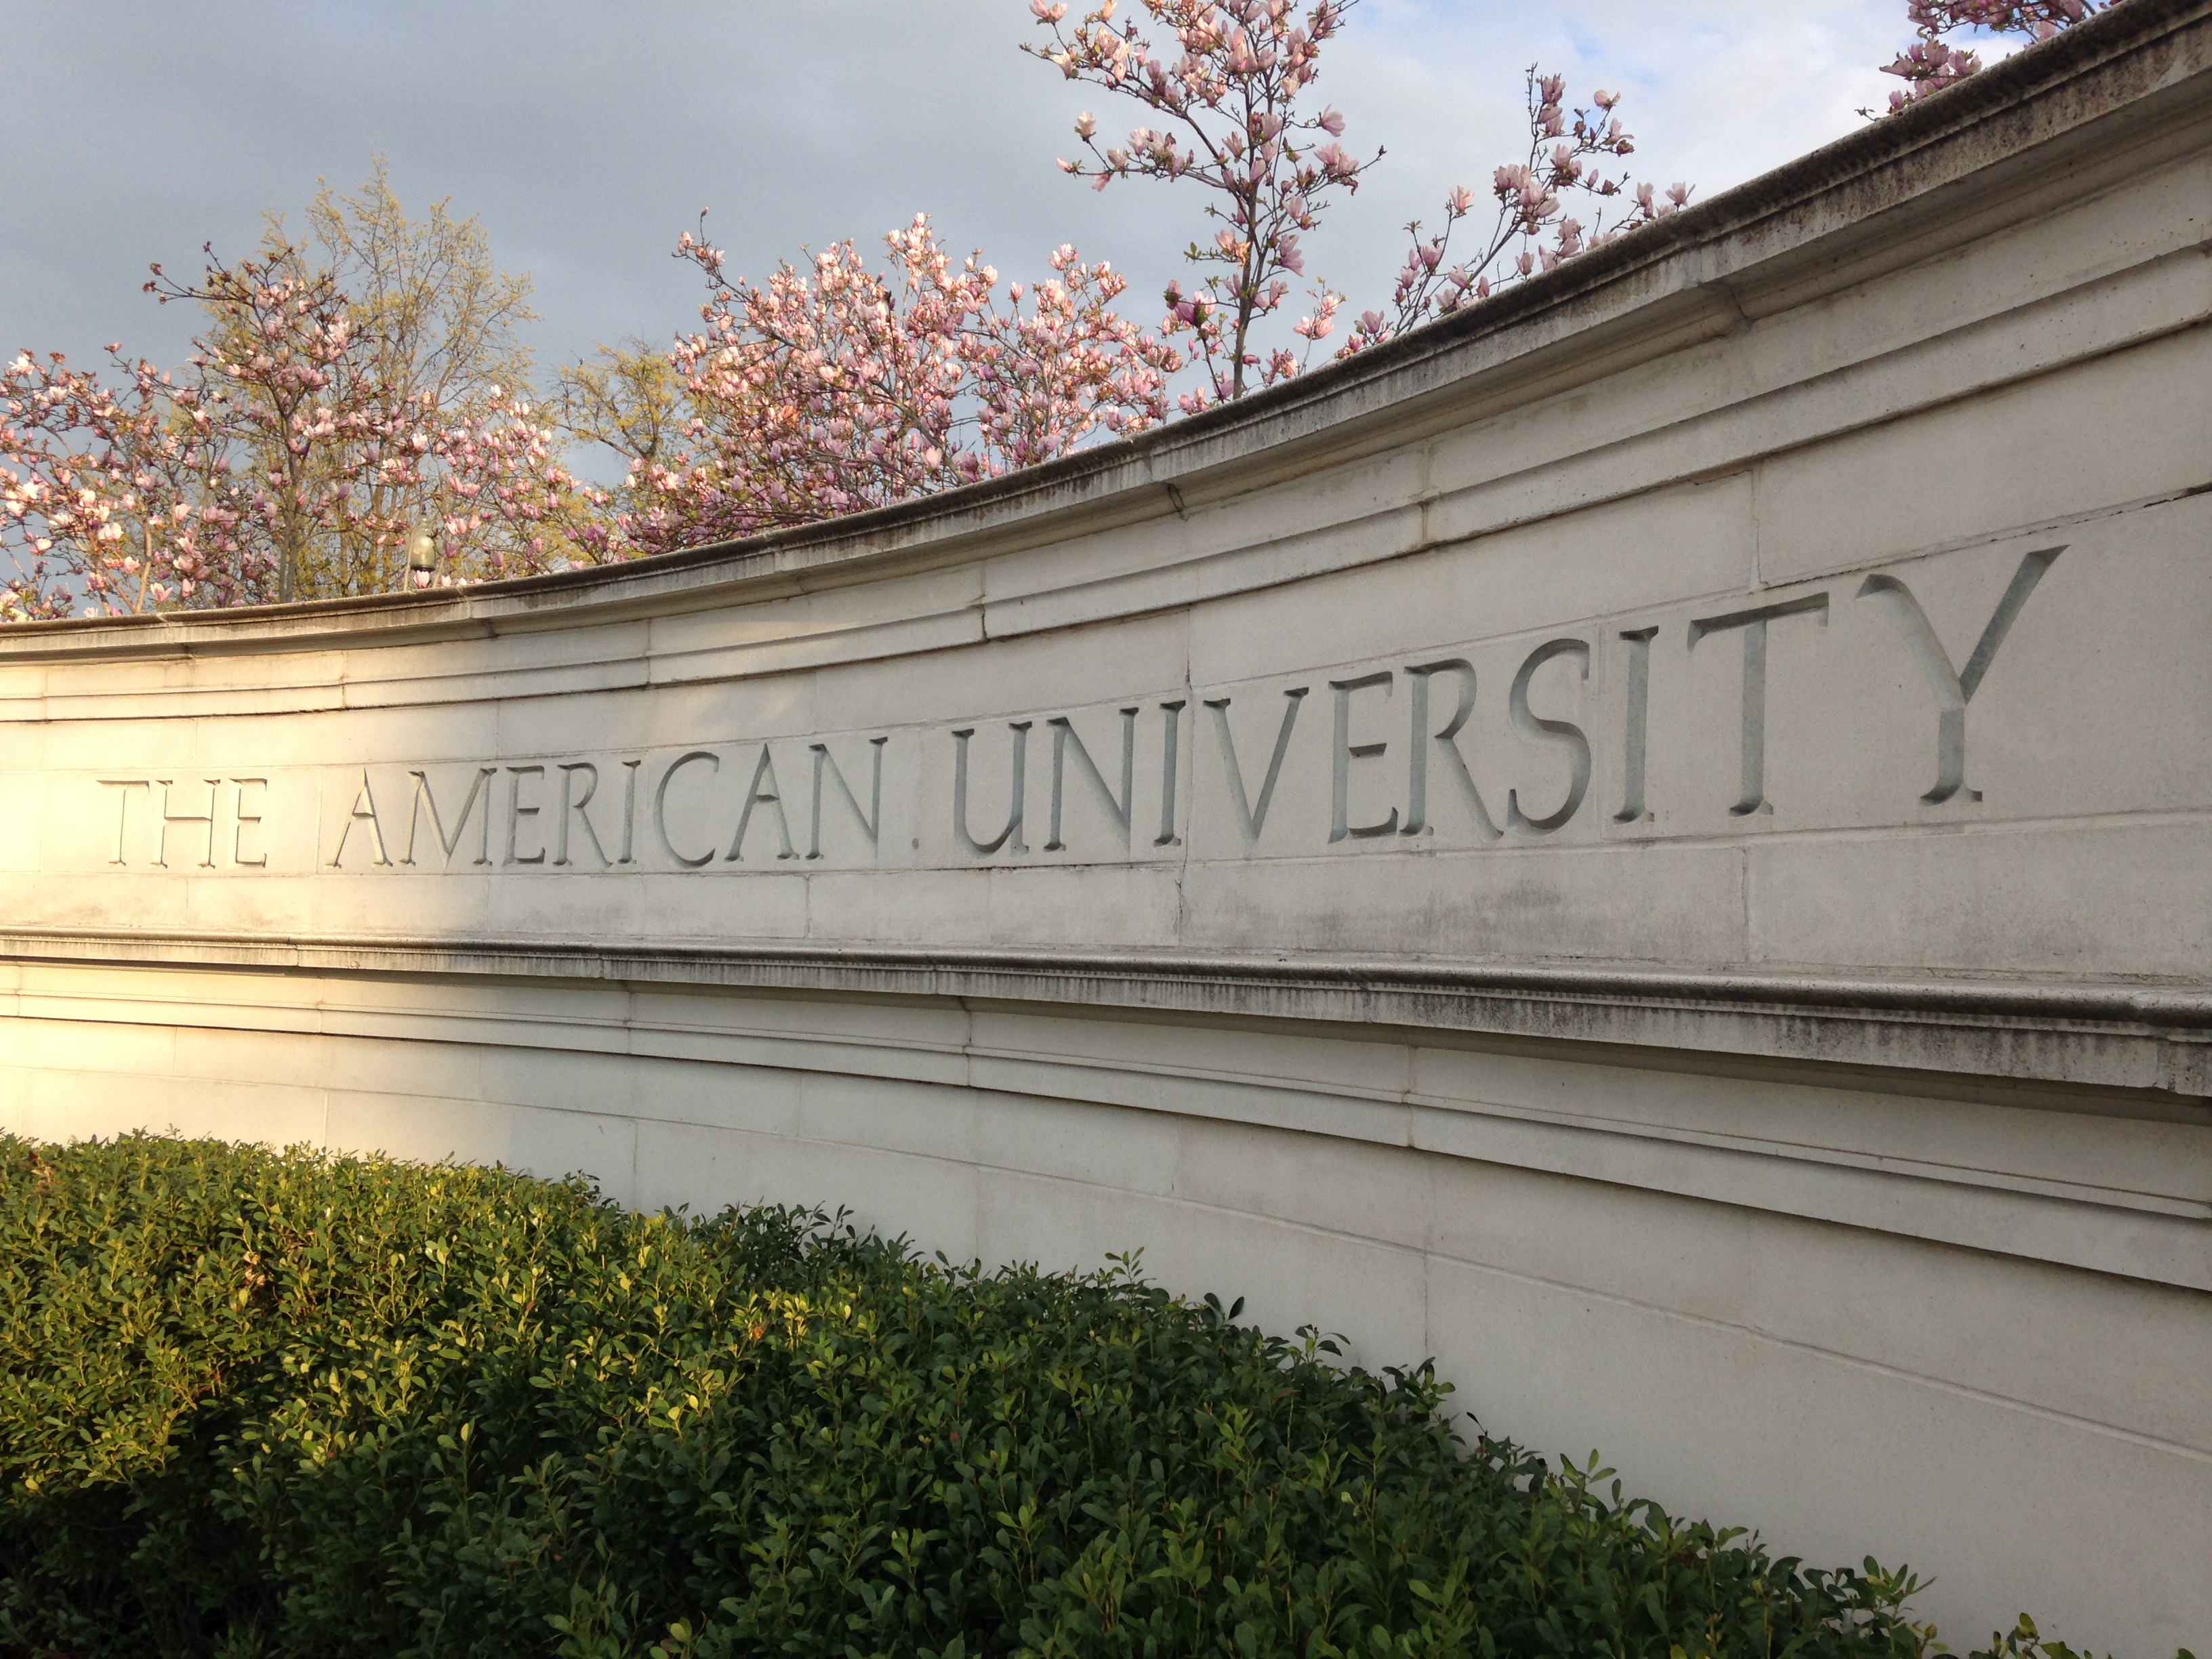 American University expels 18 suspected of involvement in banned group